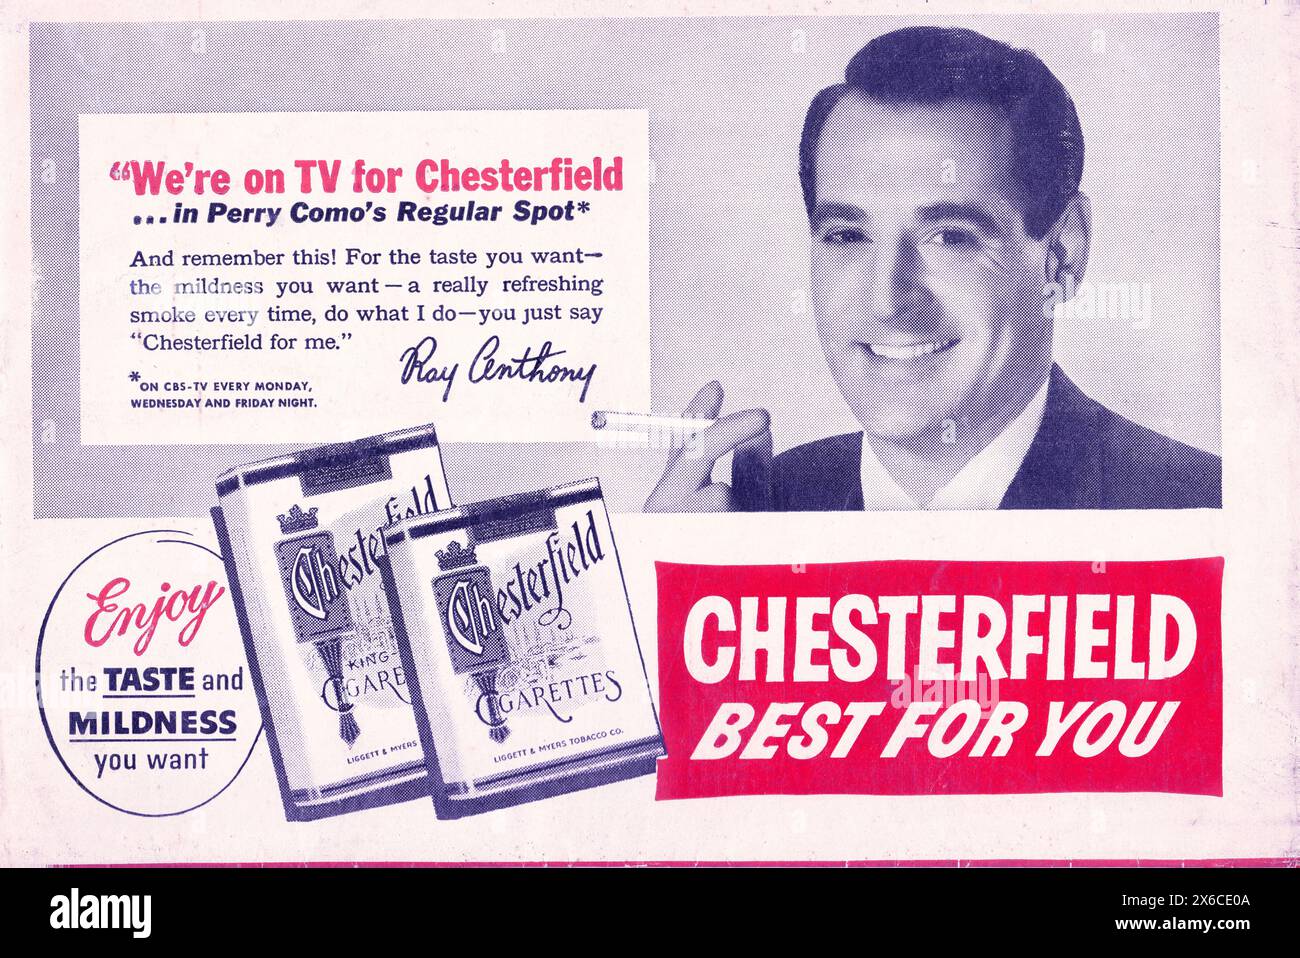 A 1954 ad for Chesterfield cigarettes featuring Ray Anthony, who was the band leader for the Perry Como show on CBS TV. Stock Photo